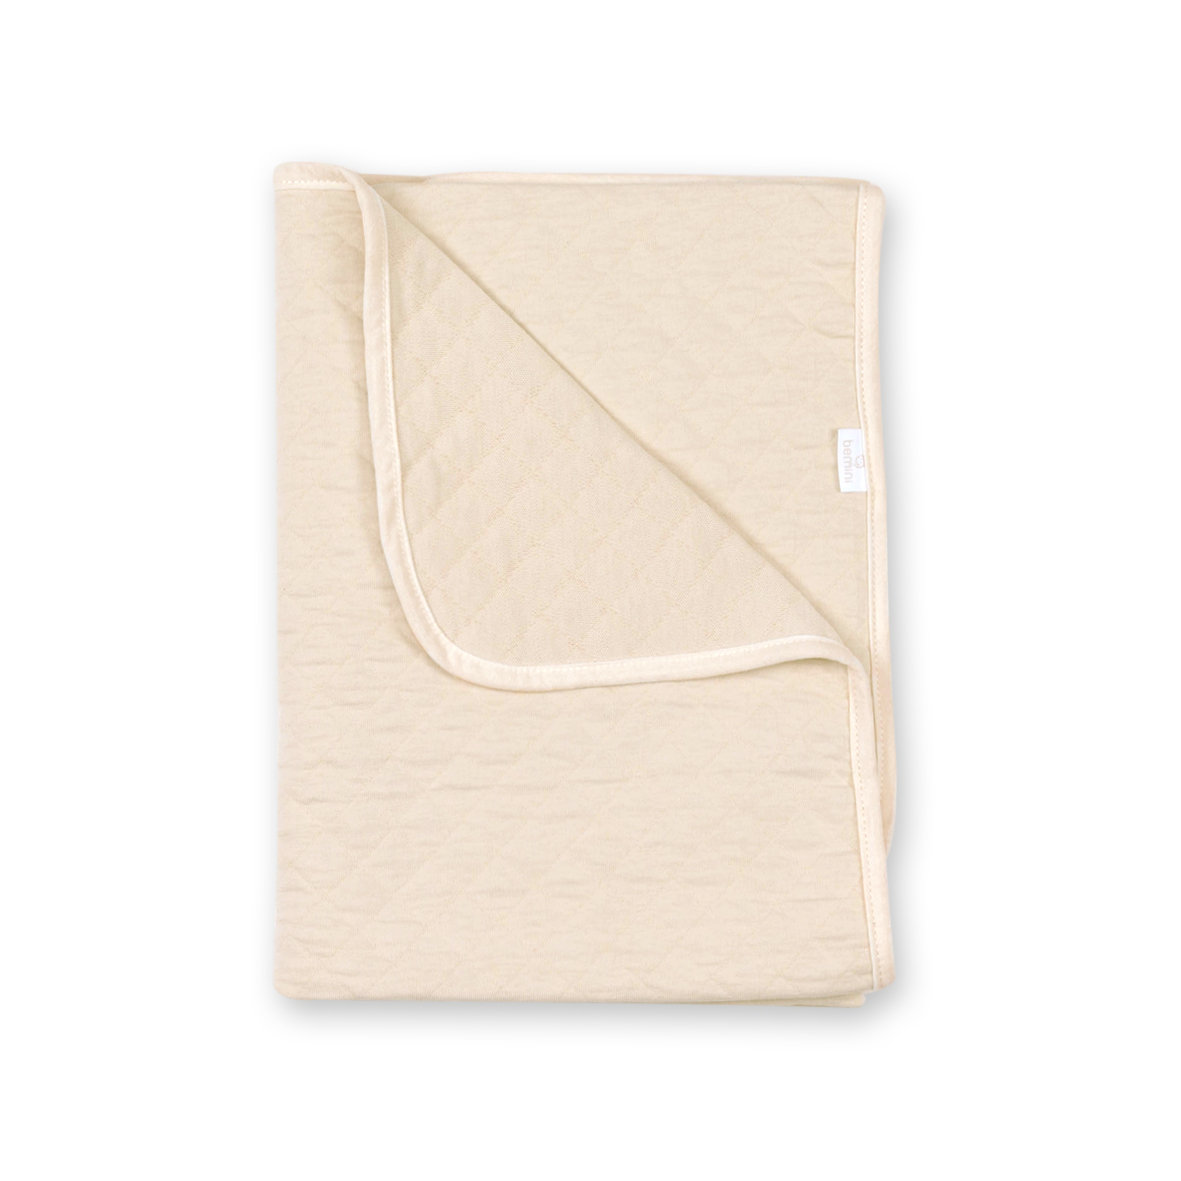 Couverture Pady quilted jersey 75x100cm QUILT Cream tog 1.5